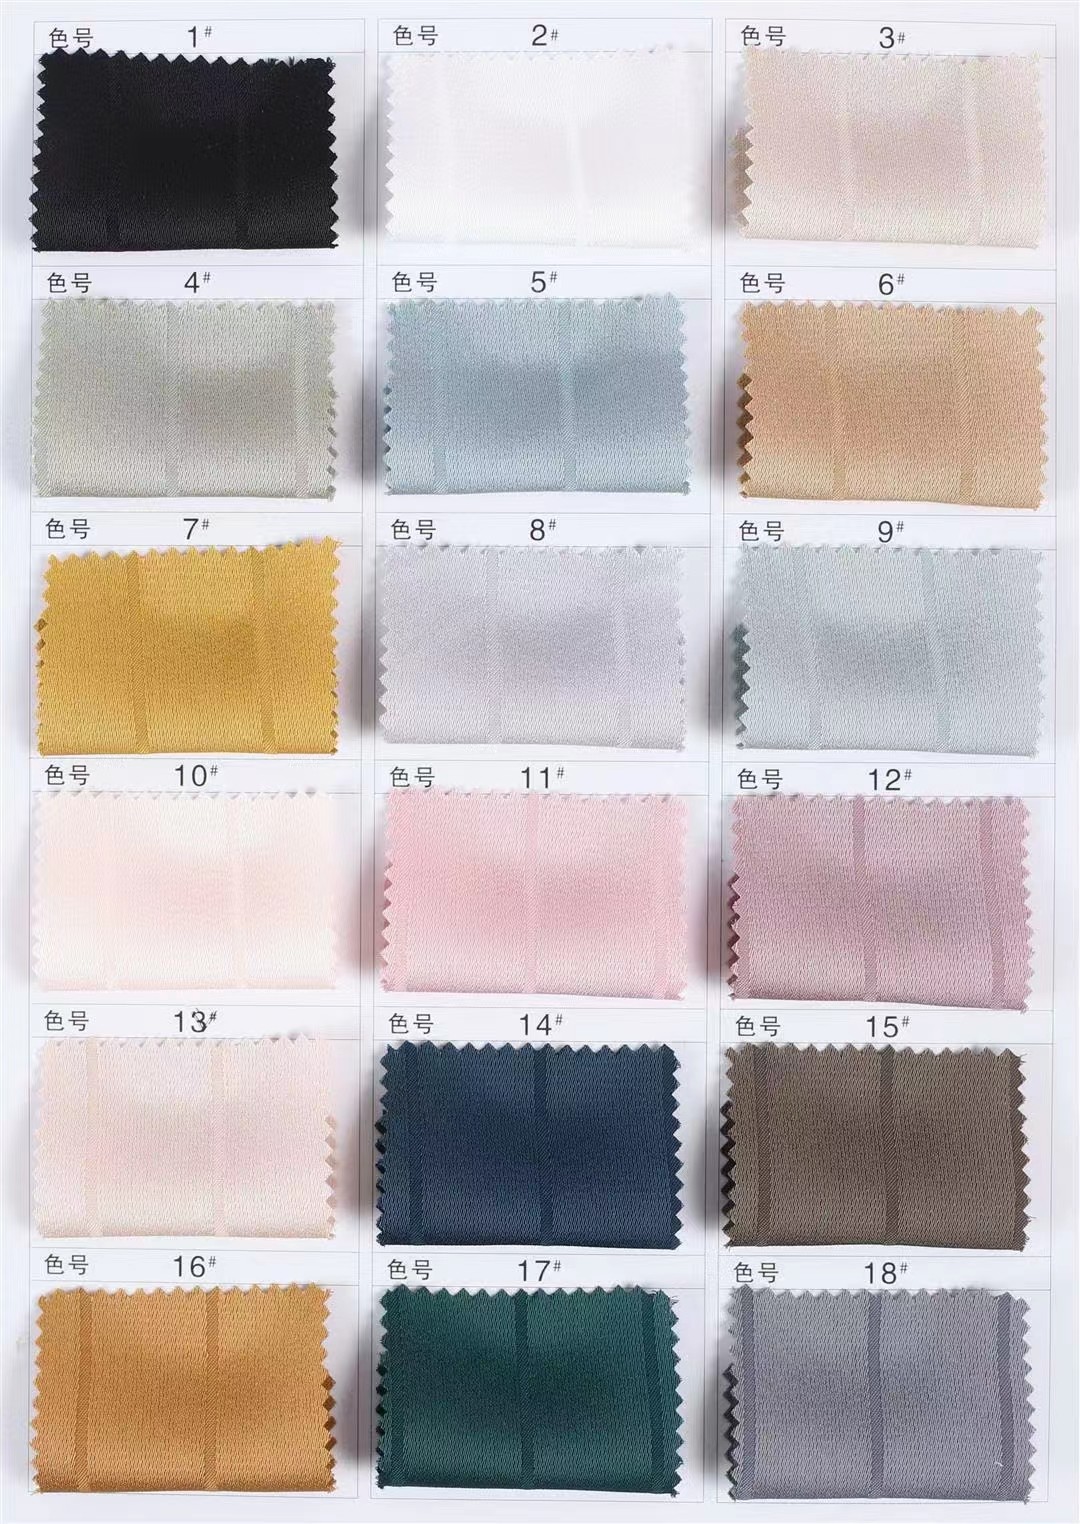 Quality 100% Recycled Polyester GRS OEKO-TEX Acetic acid beauty strip fabrics for Suit Dress Shirts comfortable absorb sweat wholesale